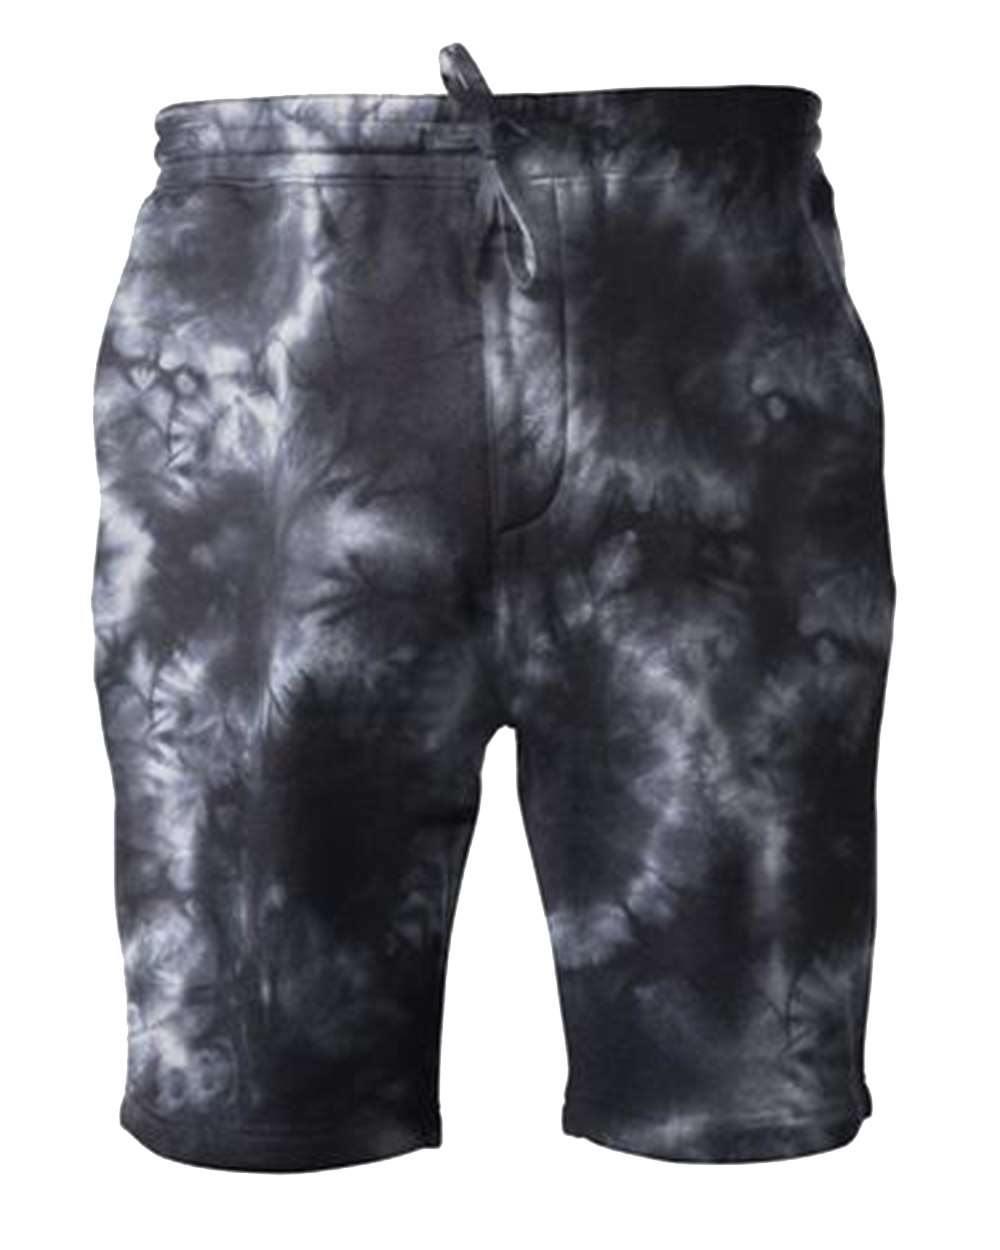 Blank Pigment Tie Dyed Fleece Shorts - Constantly Create Shop